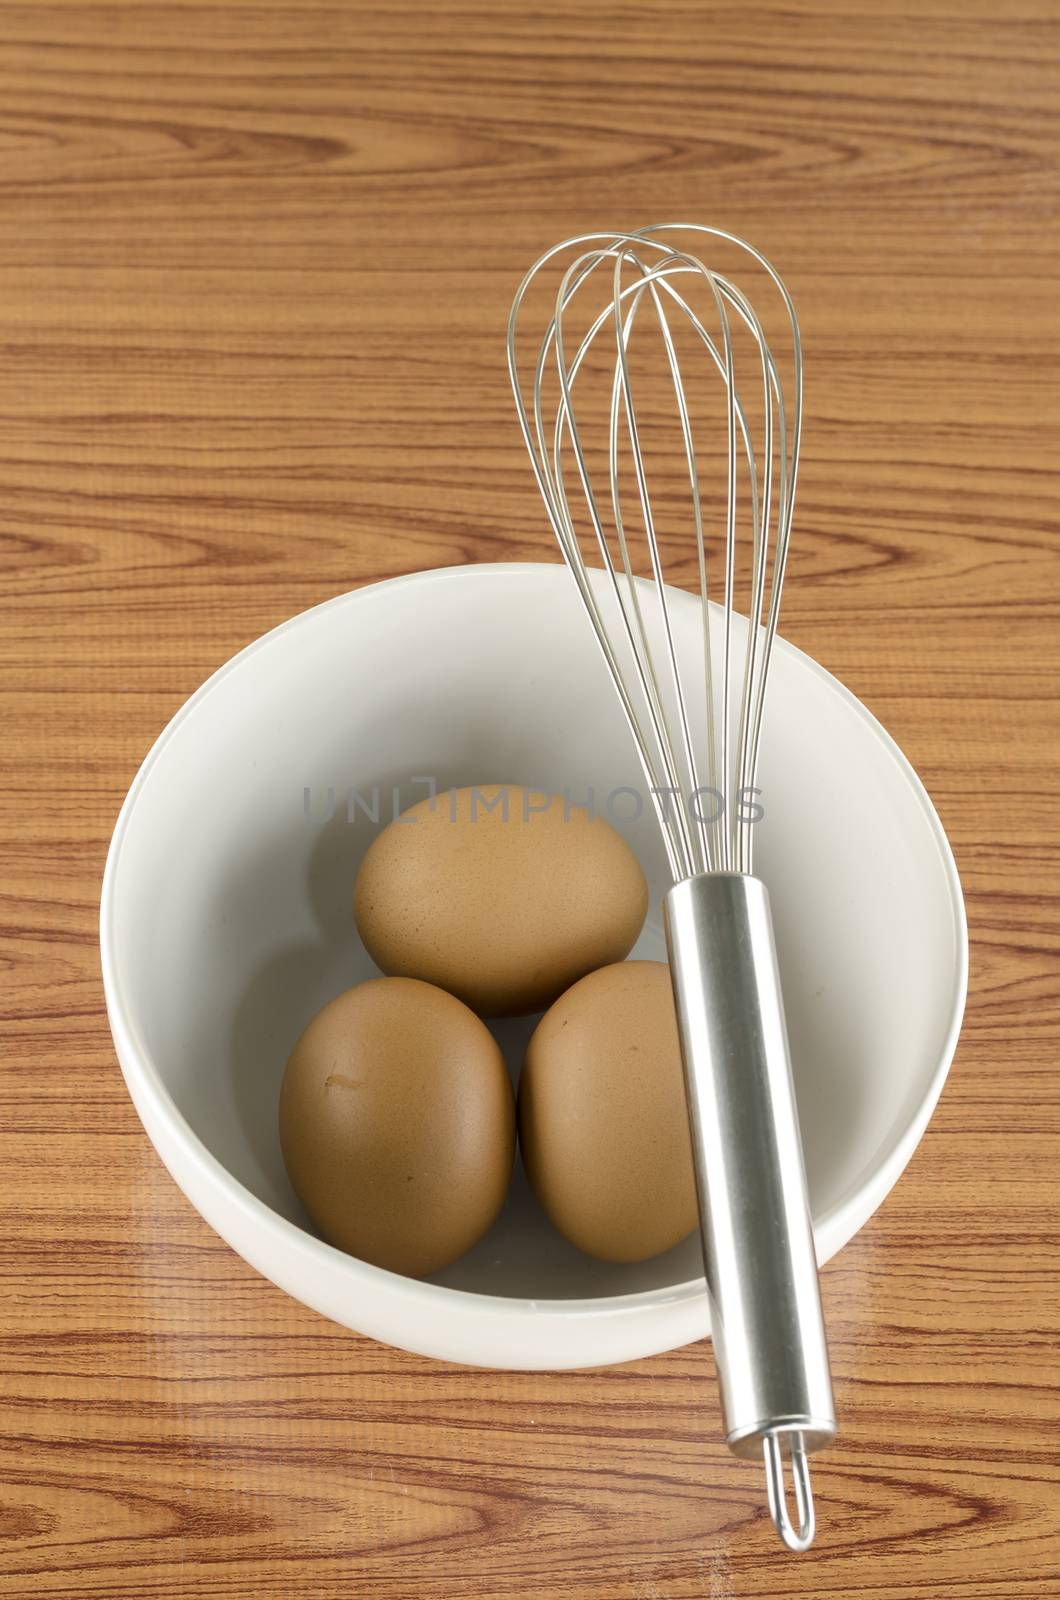 whisk and egg in white bowl on wood table background